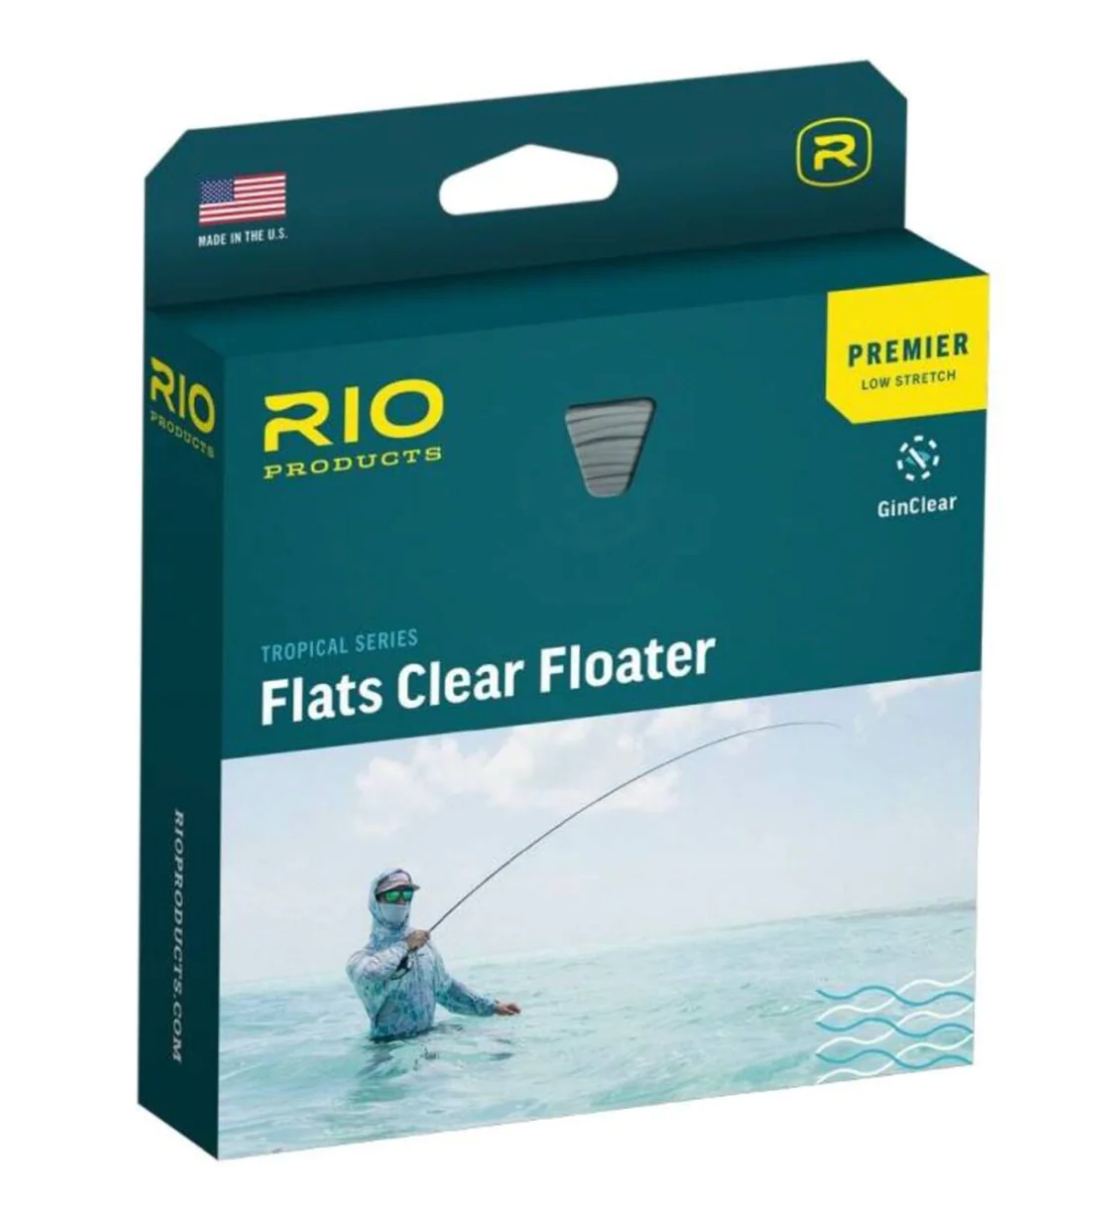 Rio Premier Flats Clear Floater